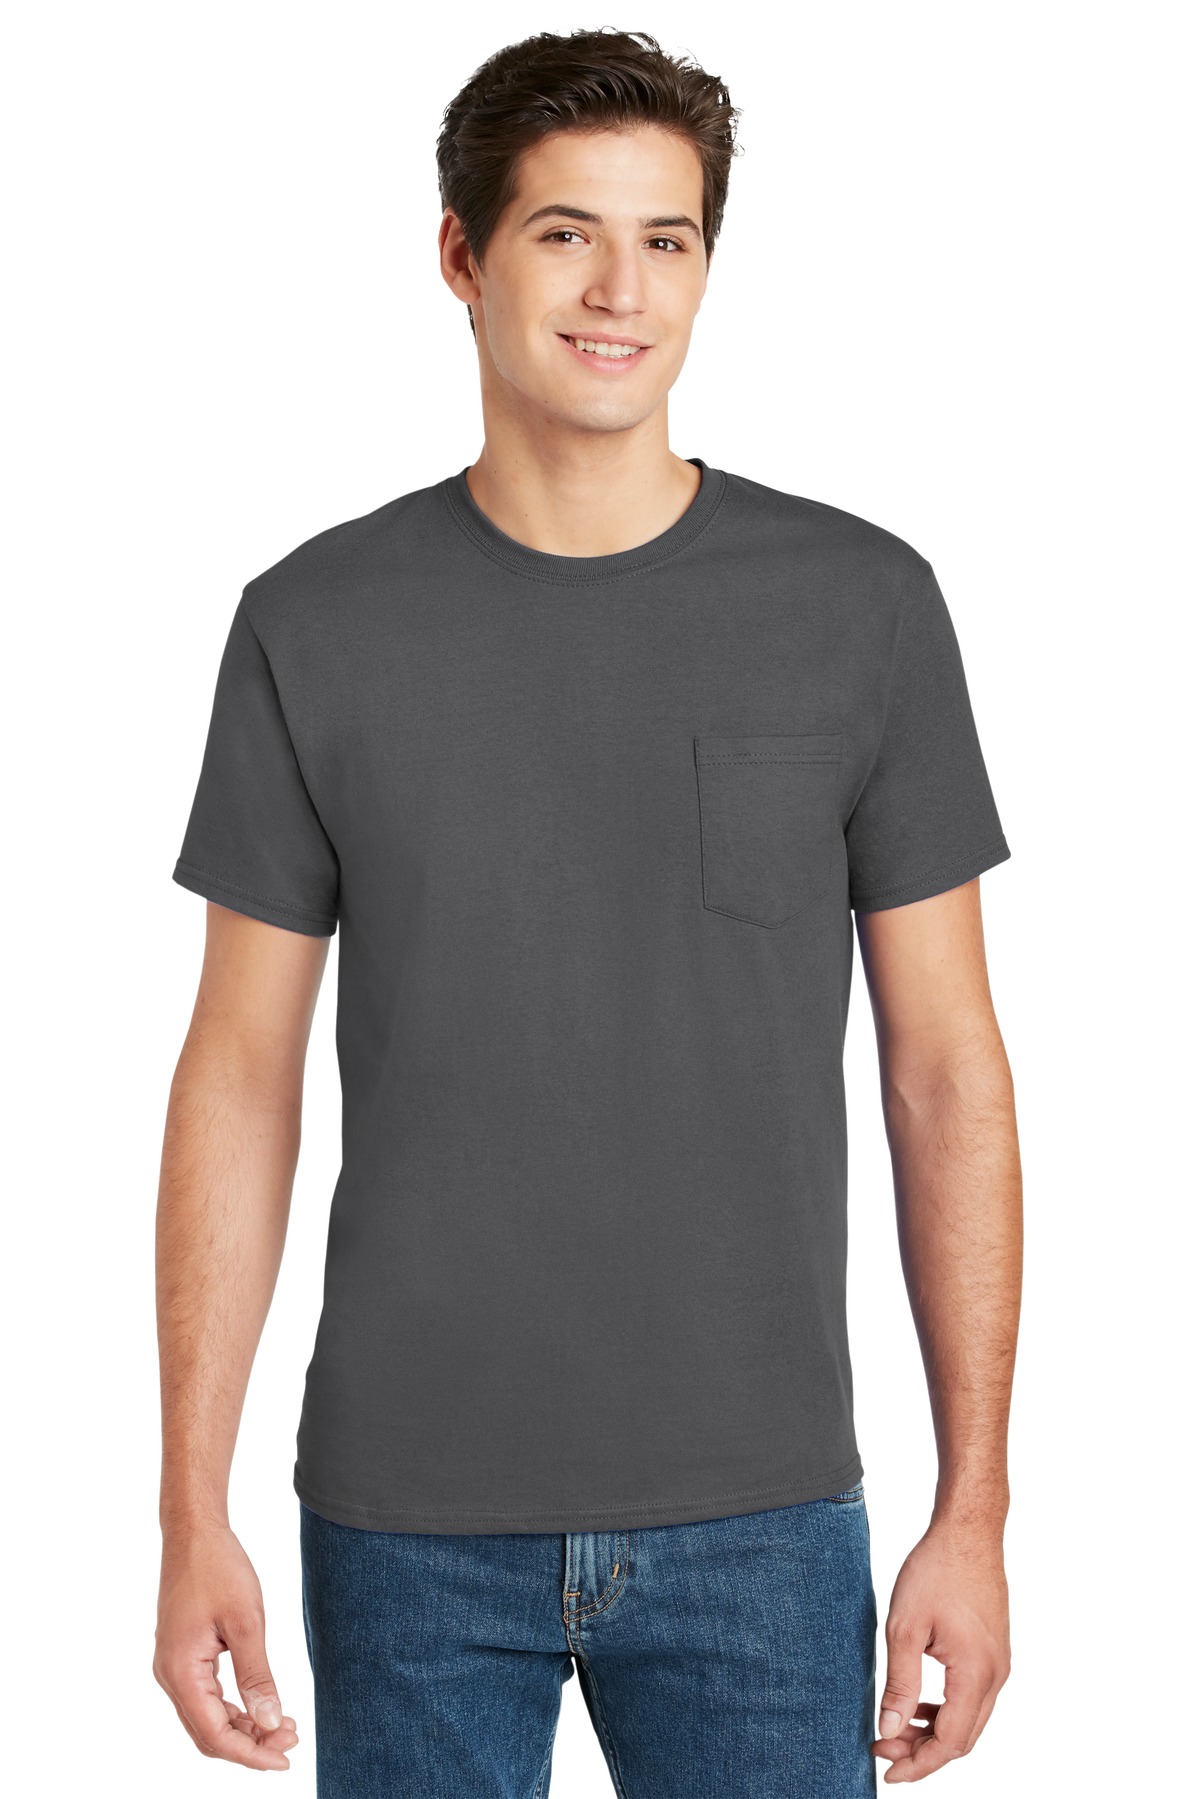 Hanes - Authentic 100% Cotton T-Shirt with Pocket - 5590